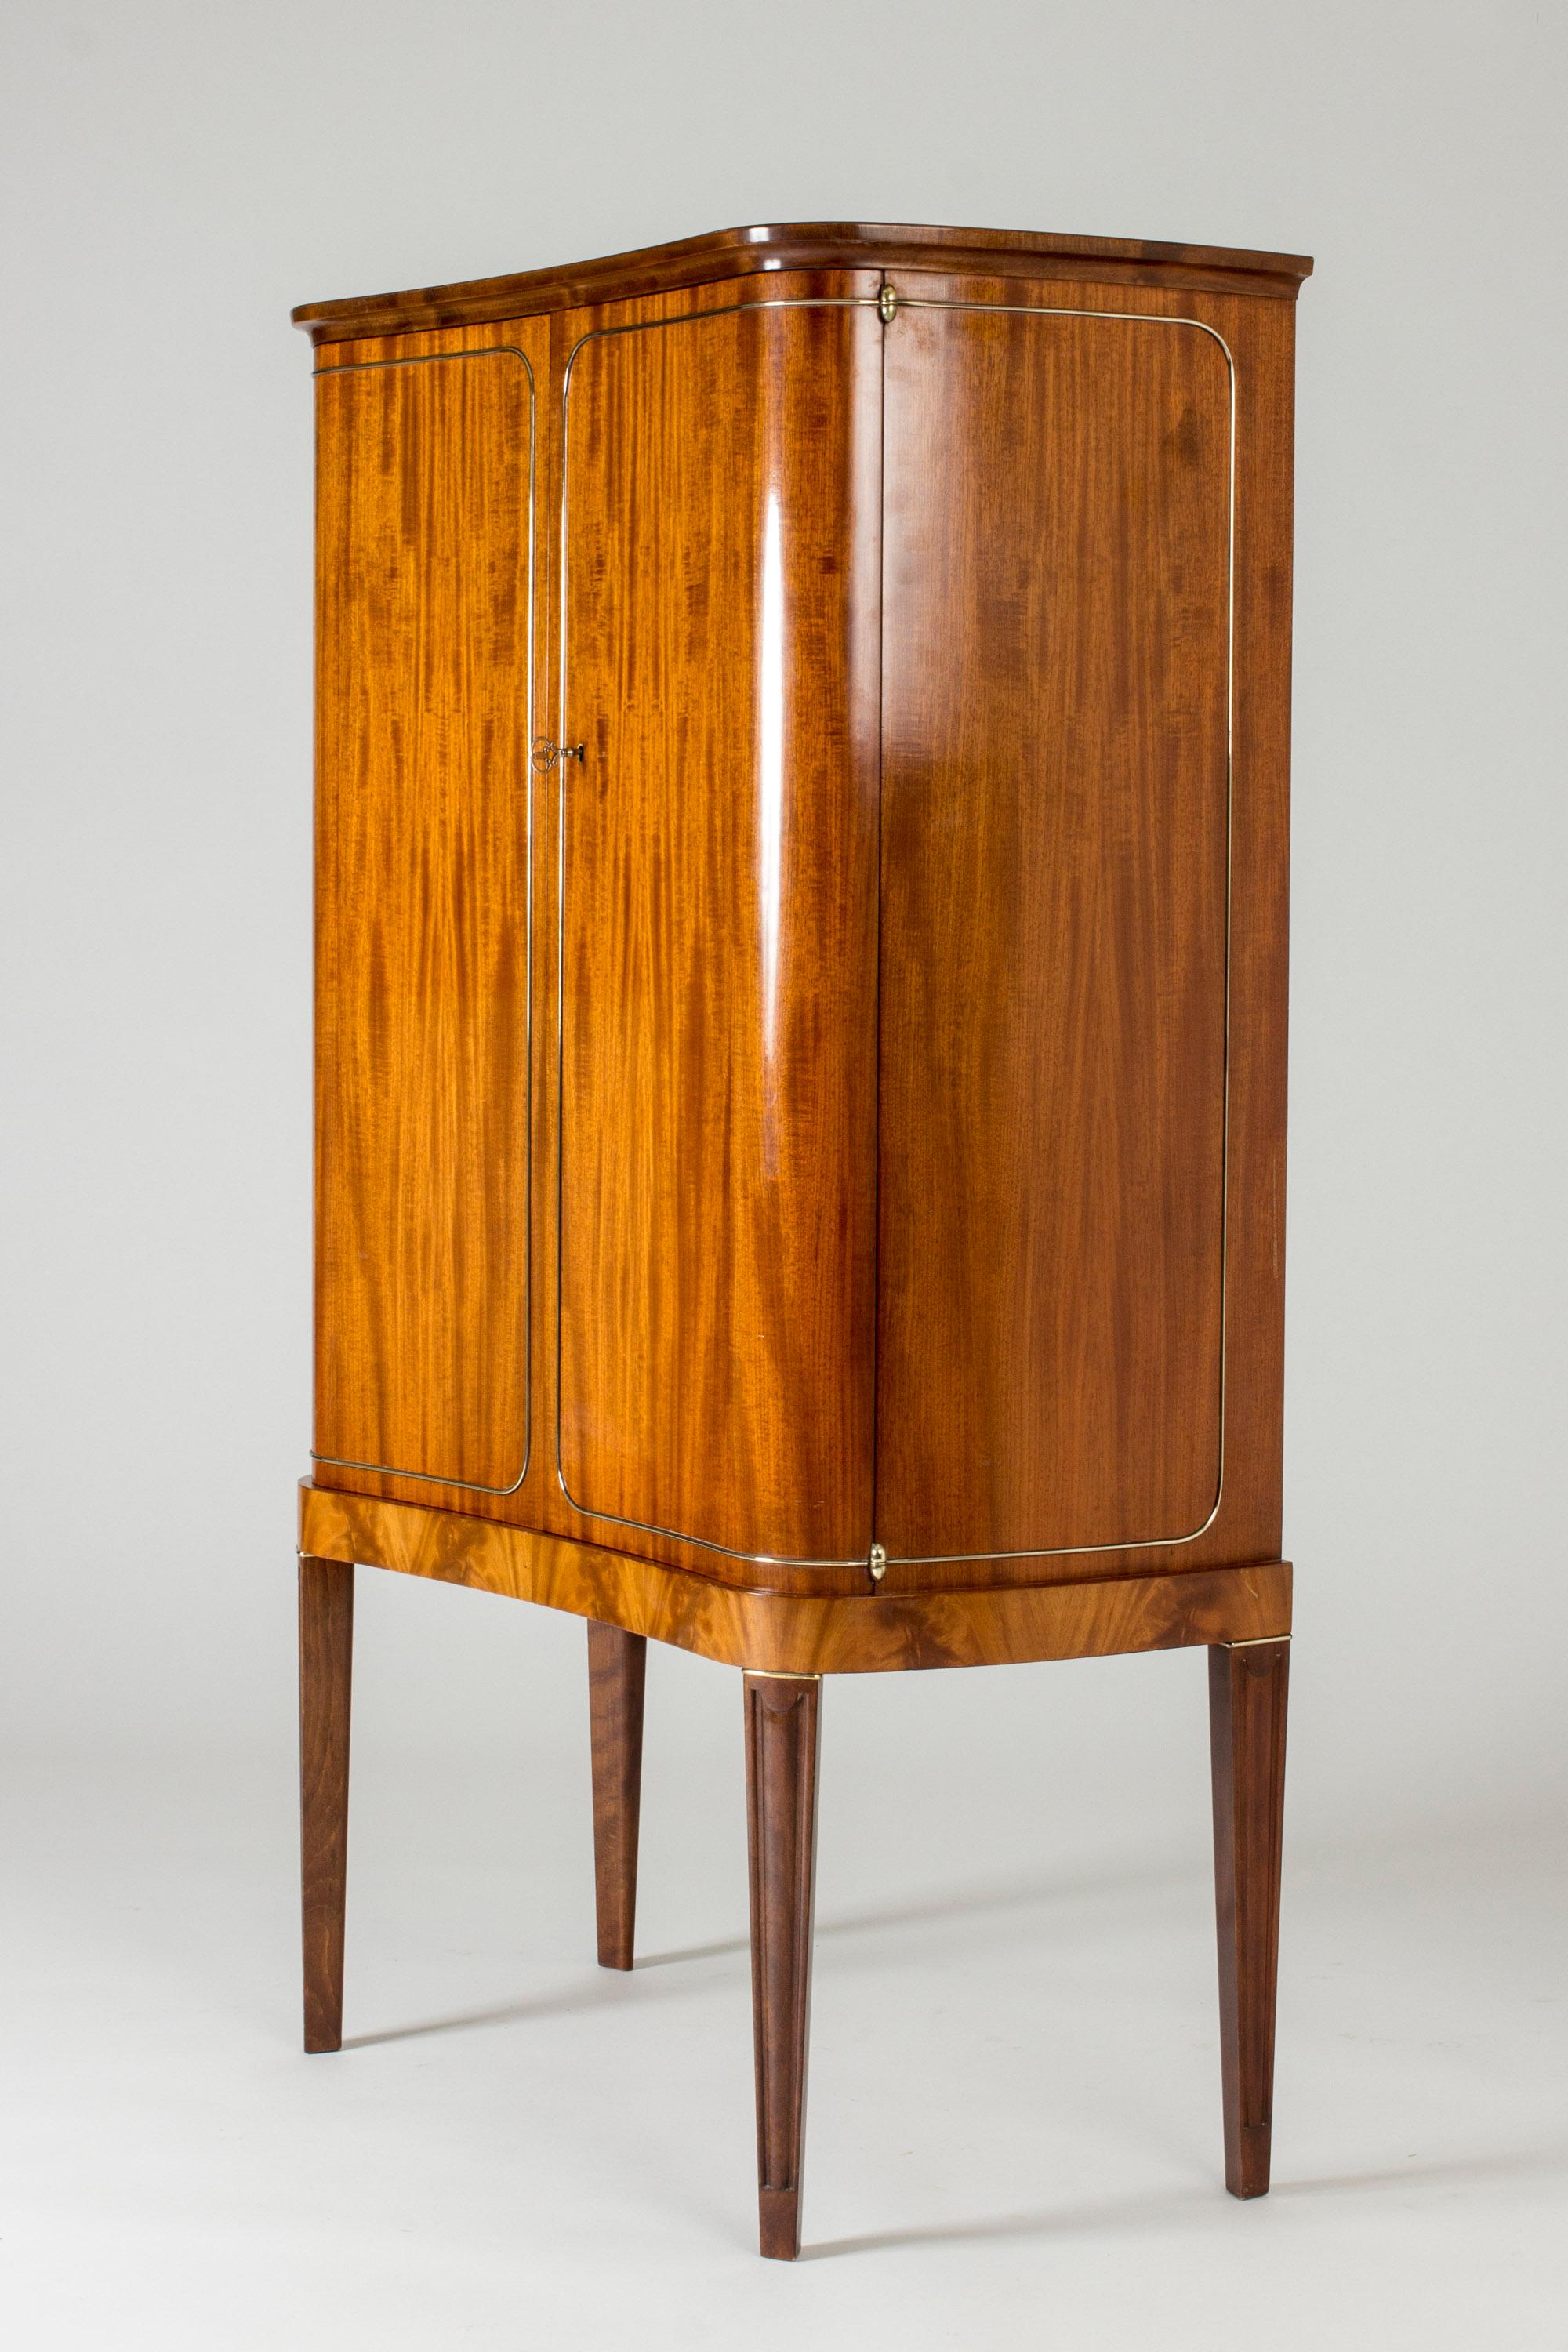 Stunning Swedish Modern cabinet by Axel Bäck. Made from mahogany. Beautifully arched front with inlayed decor of a brass line, tapering legs. Carefully executed through and through, with neat metal handles on the drawers on the inside.